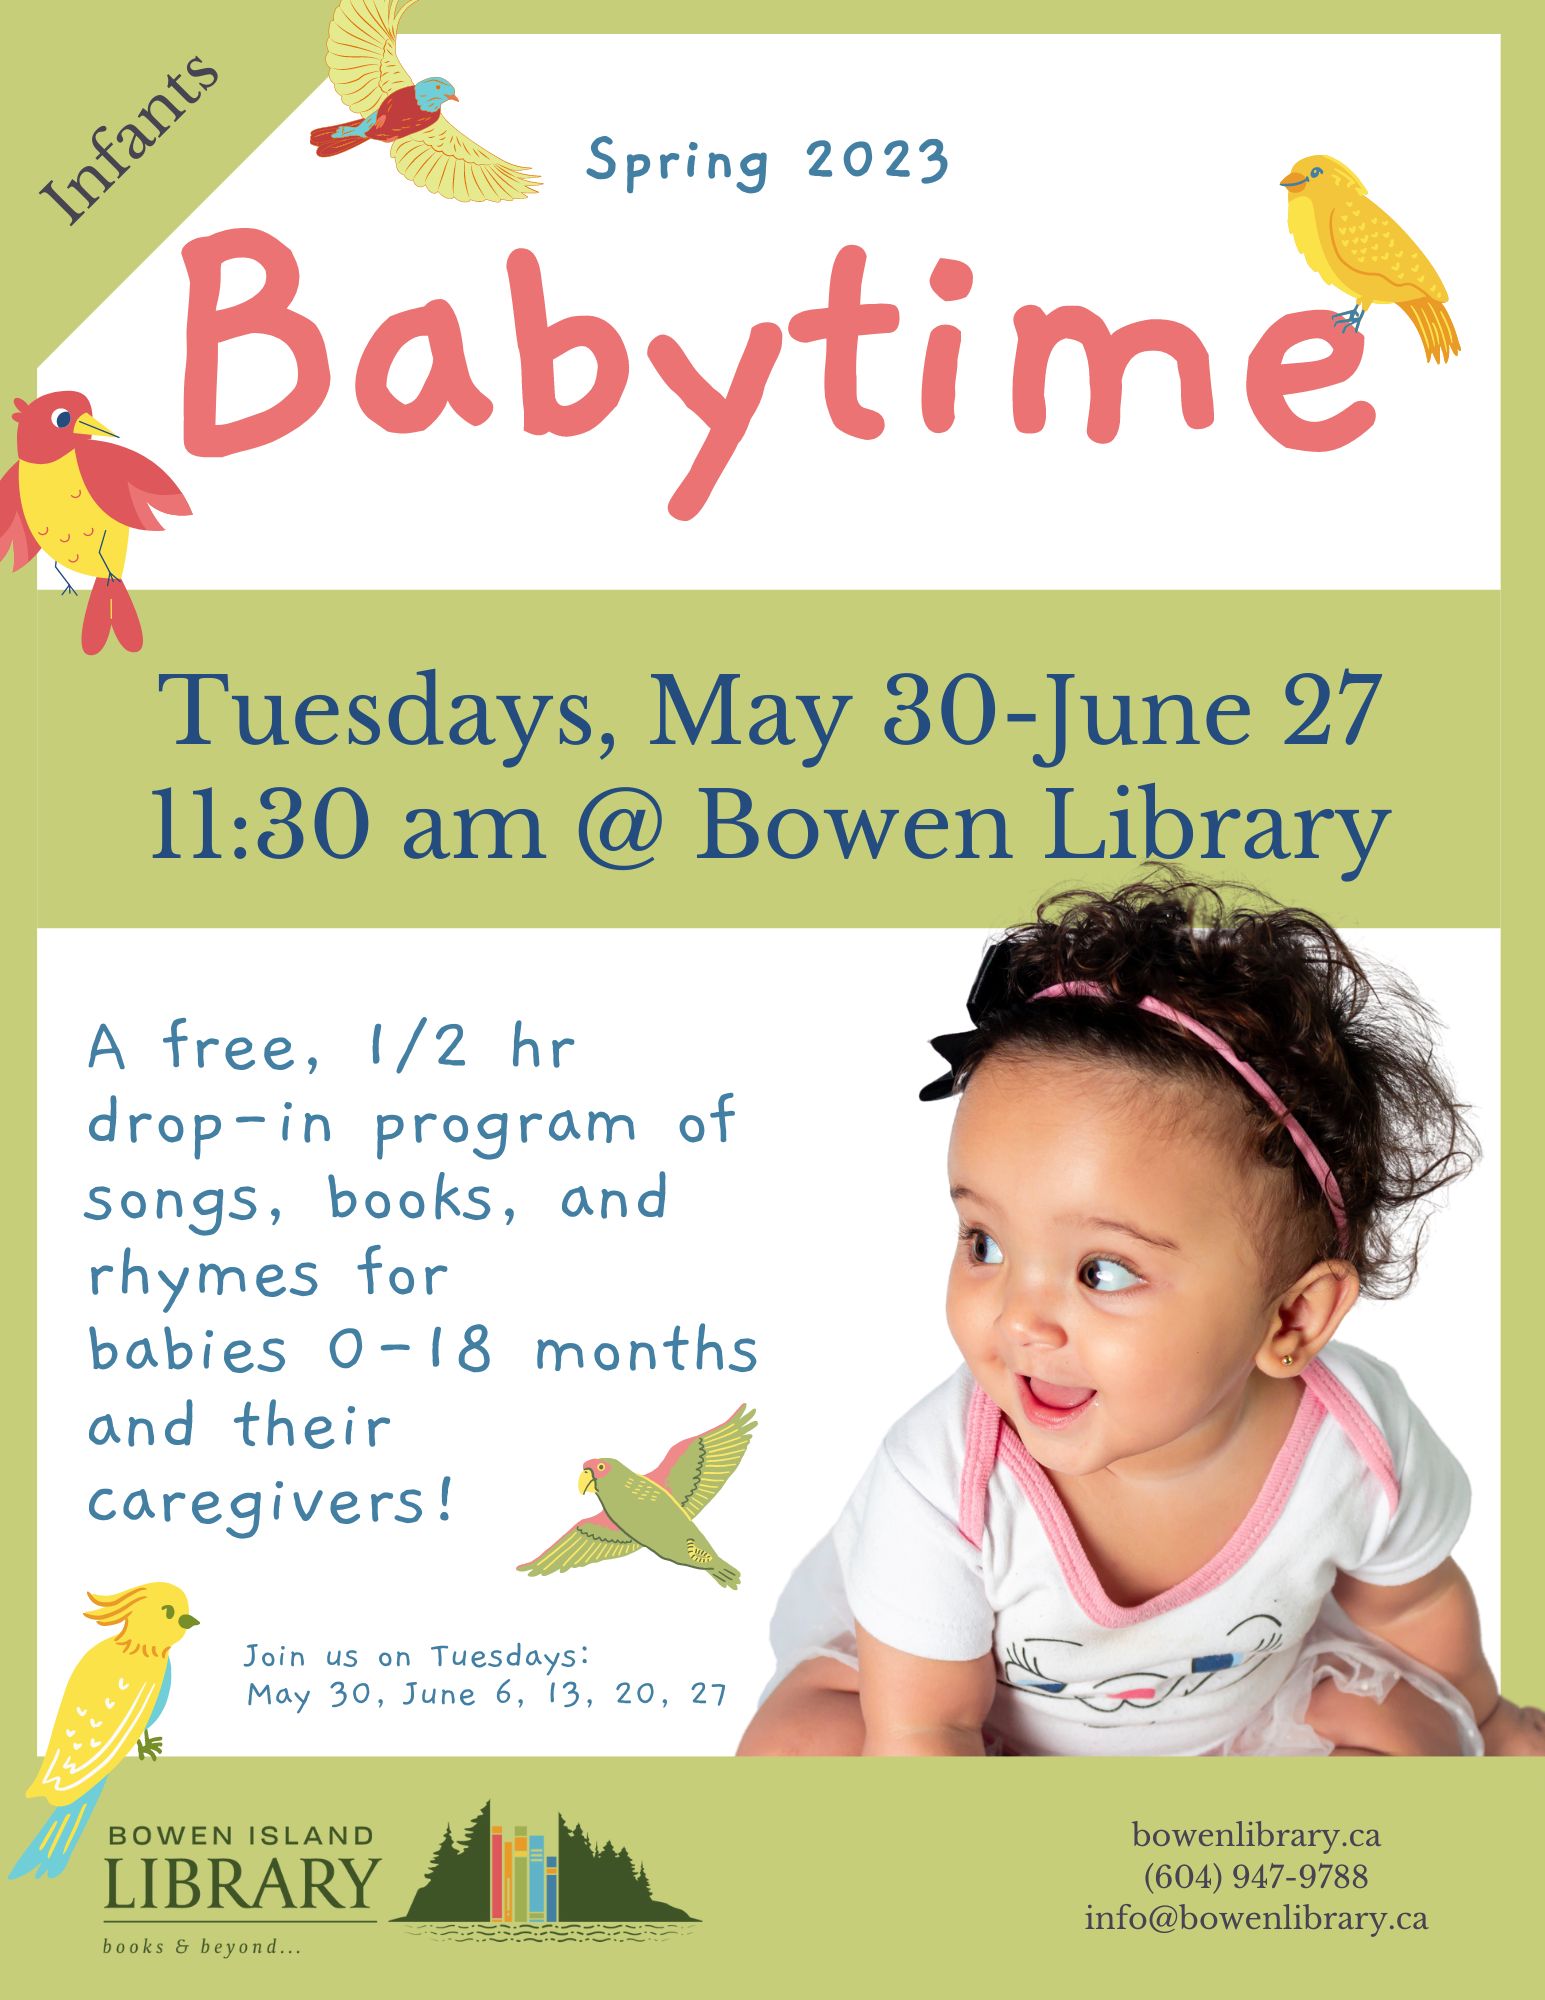 babytime poster with photo of baby and illustrations of birds